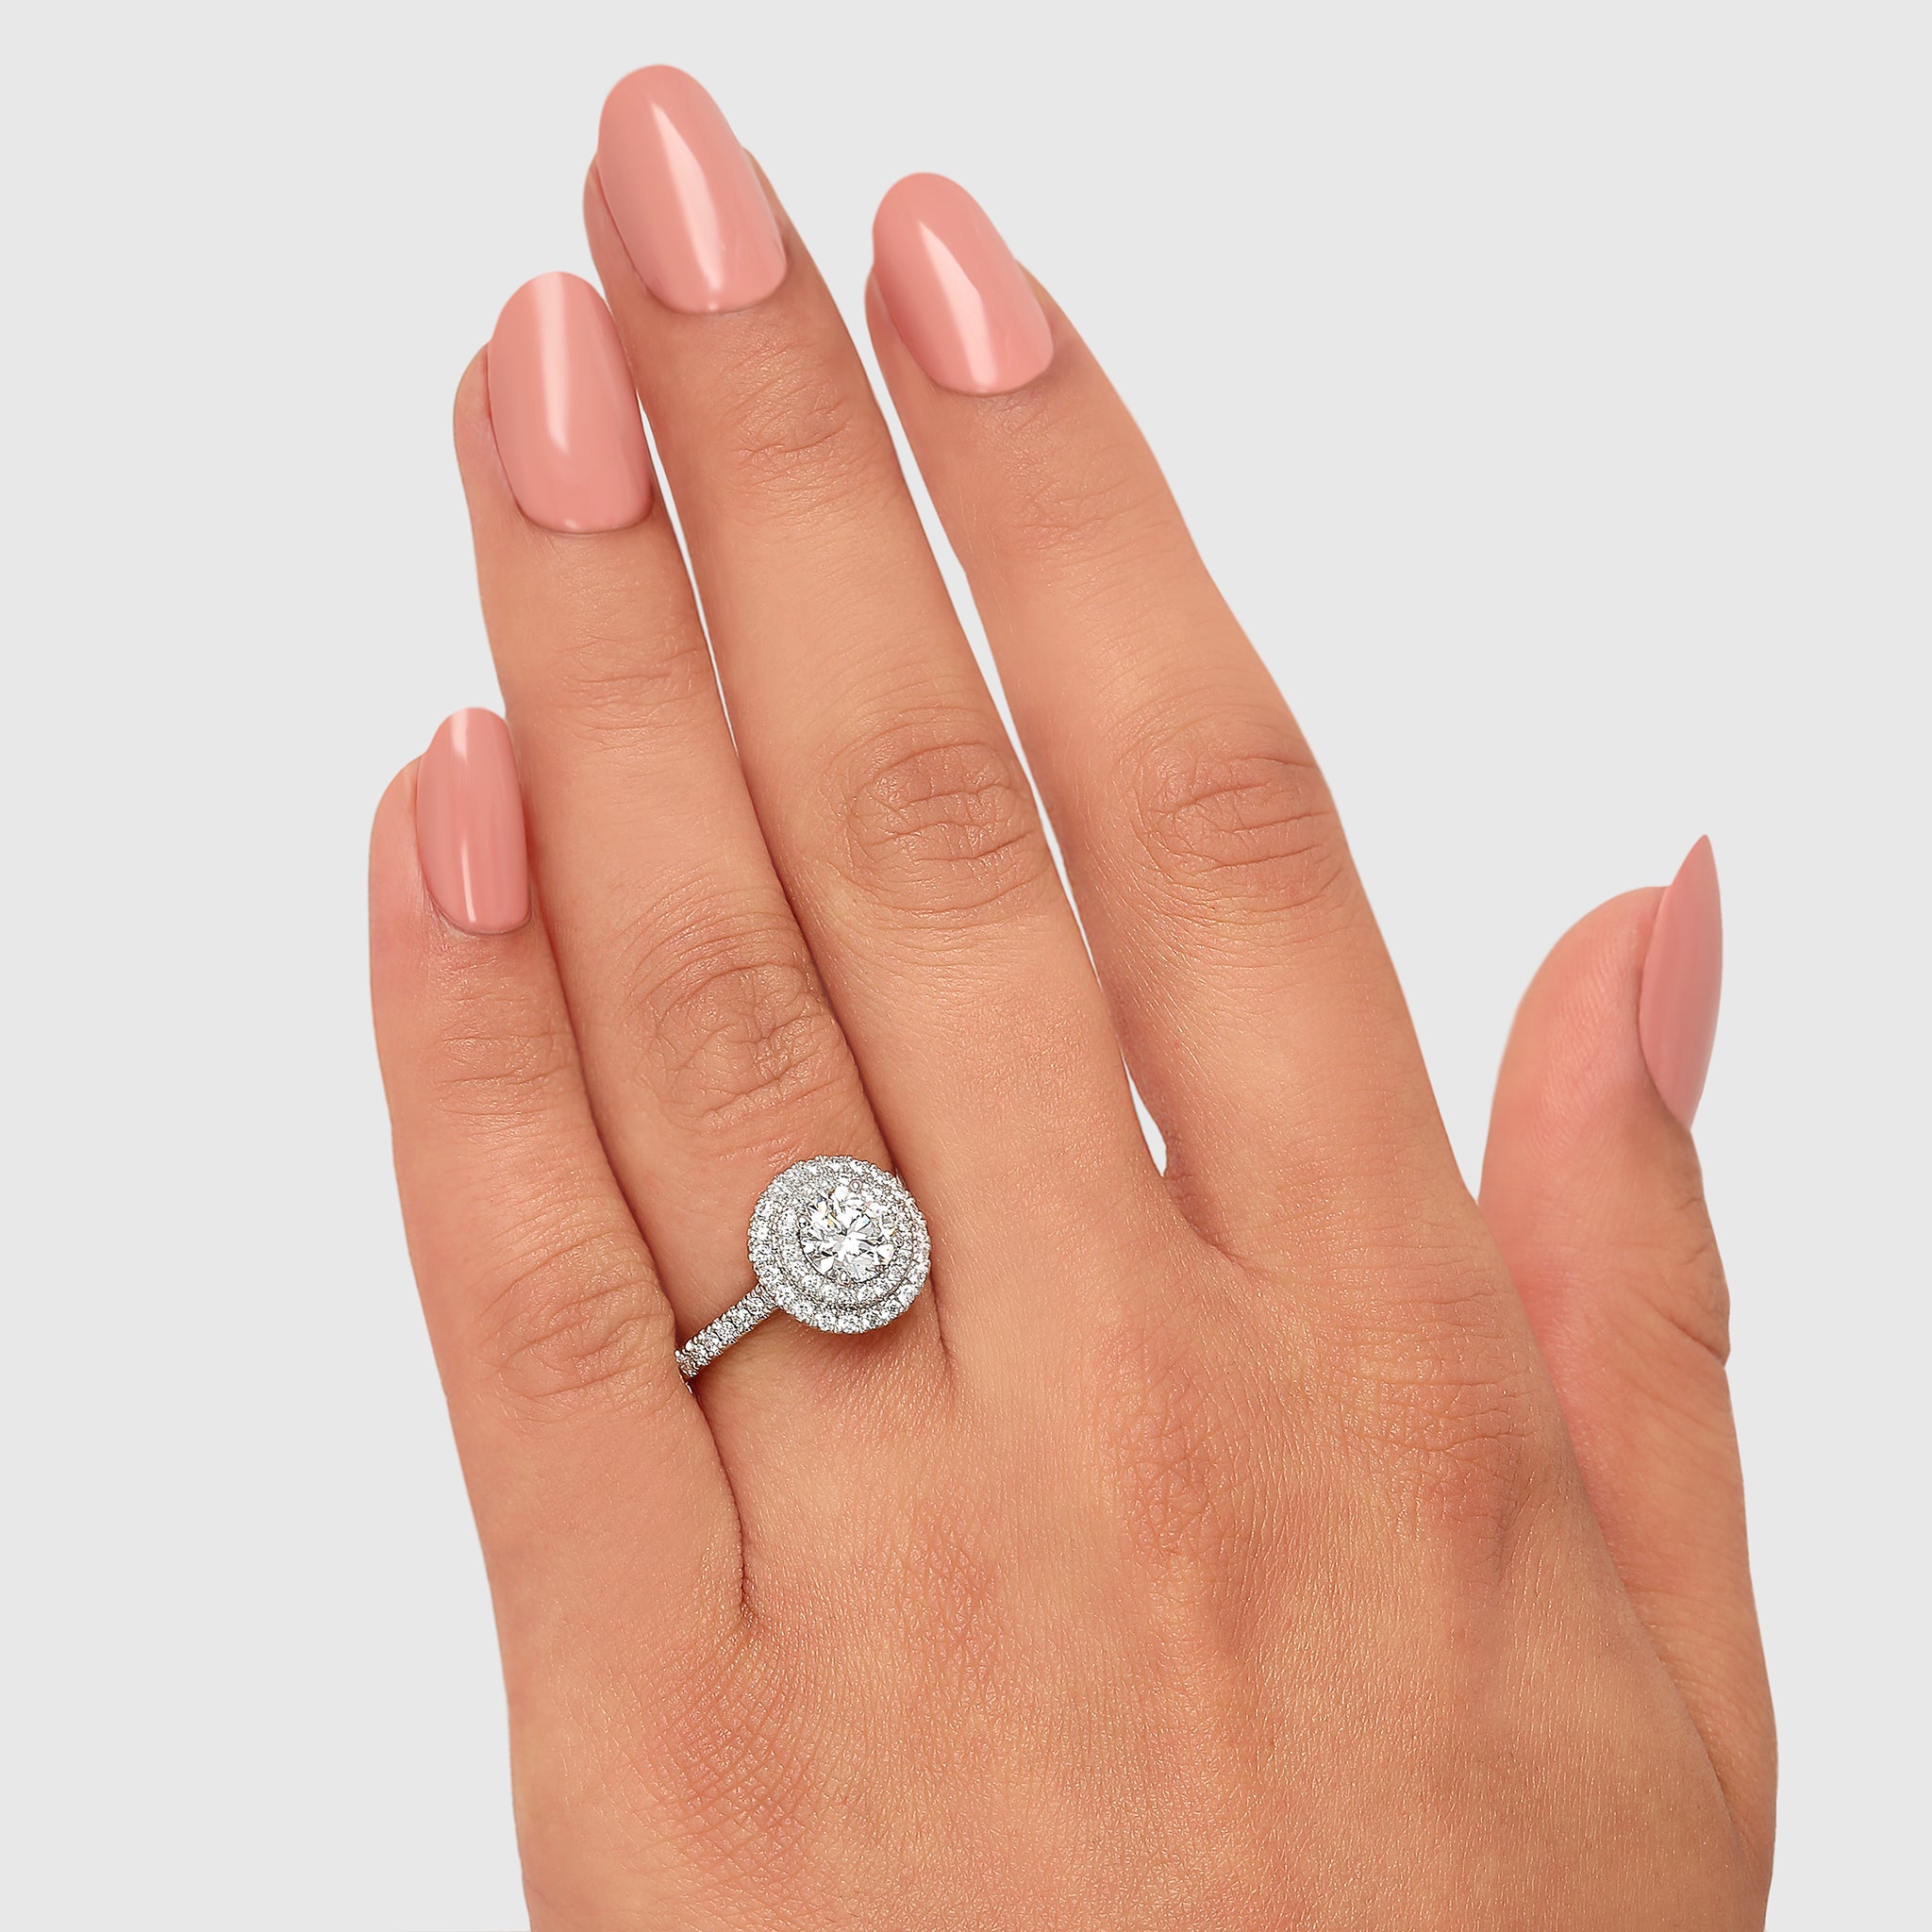 Shimansky - Women Wearing the Diamond Double Microset Halo Ring 1.50ct crafted in Platinum